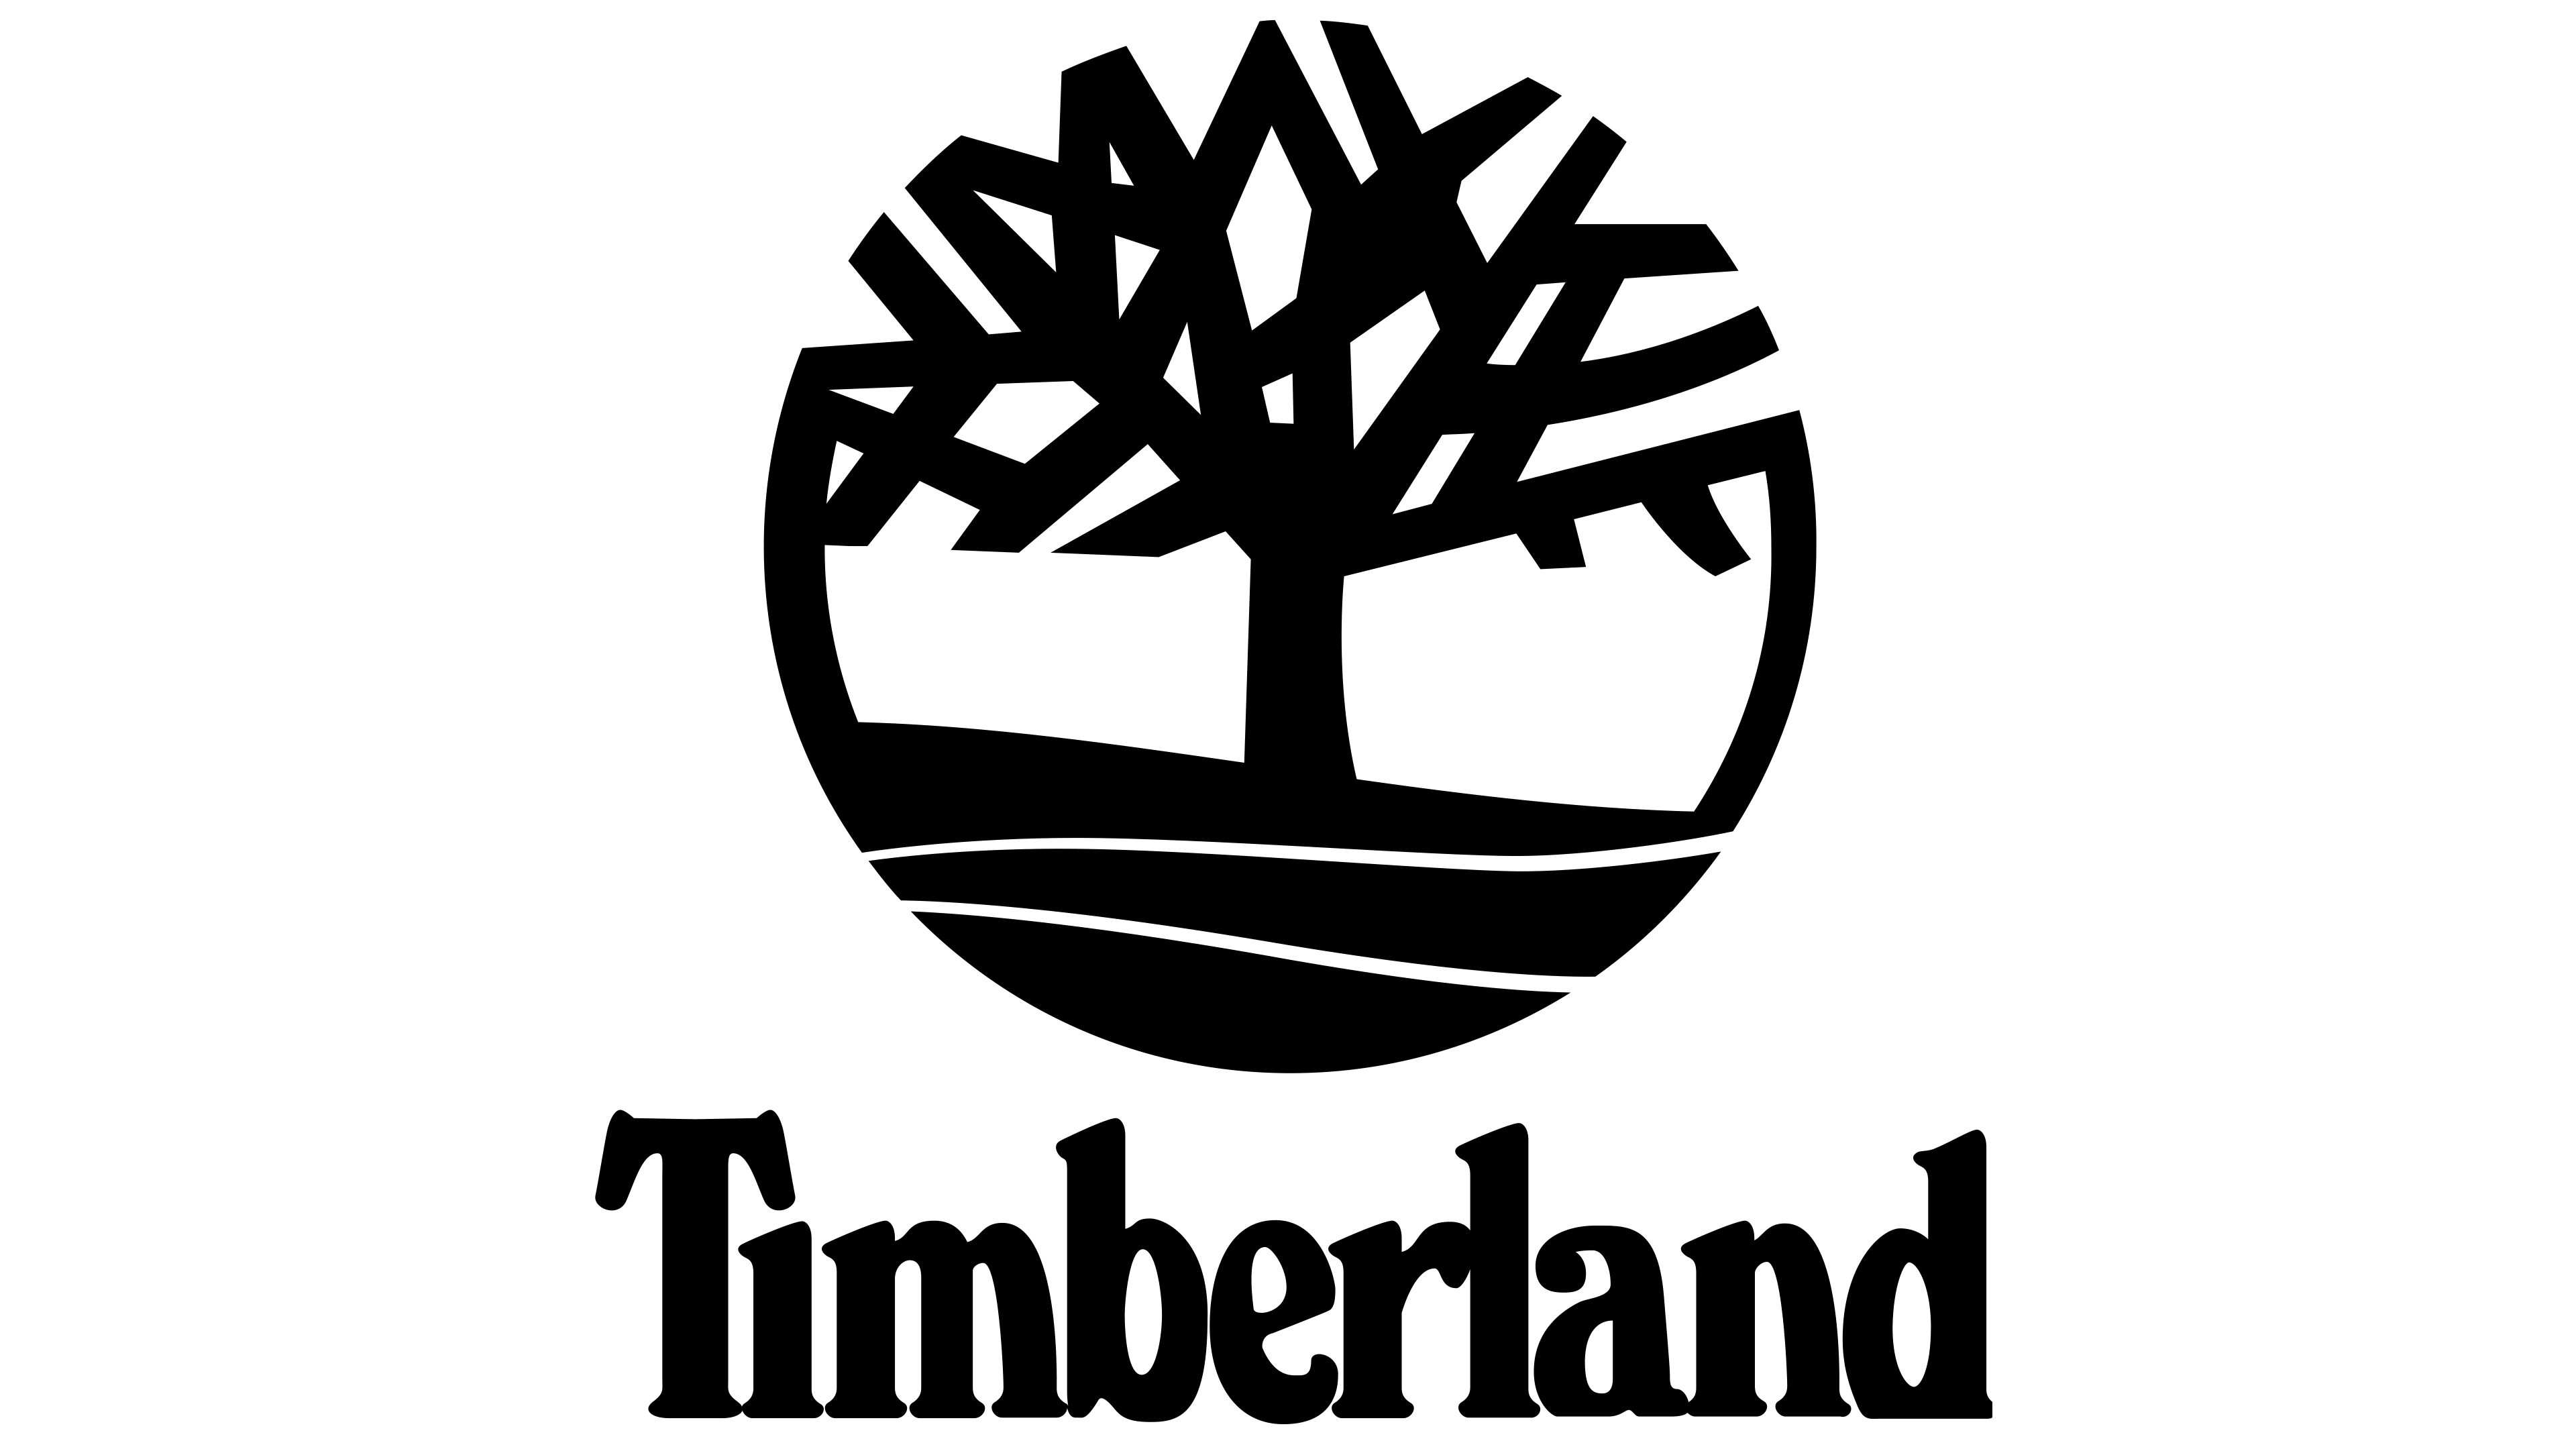 Customers Reviews about Timberland